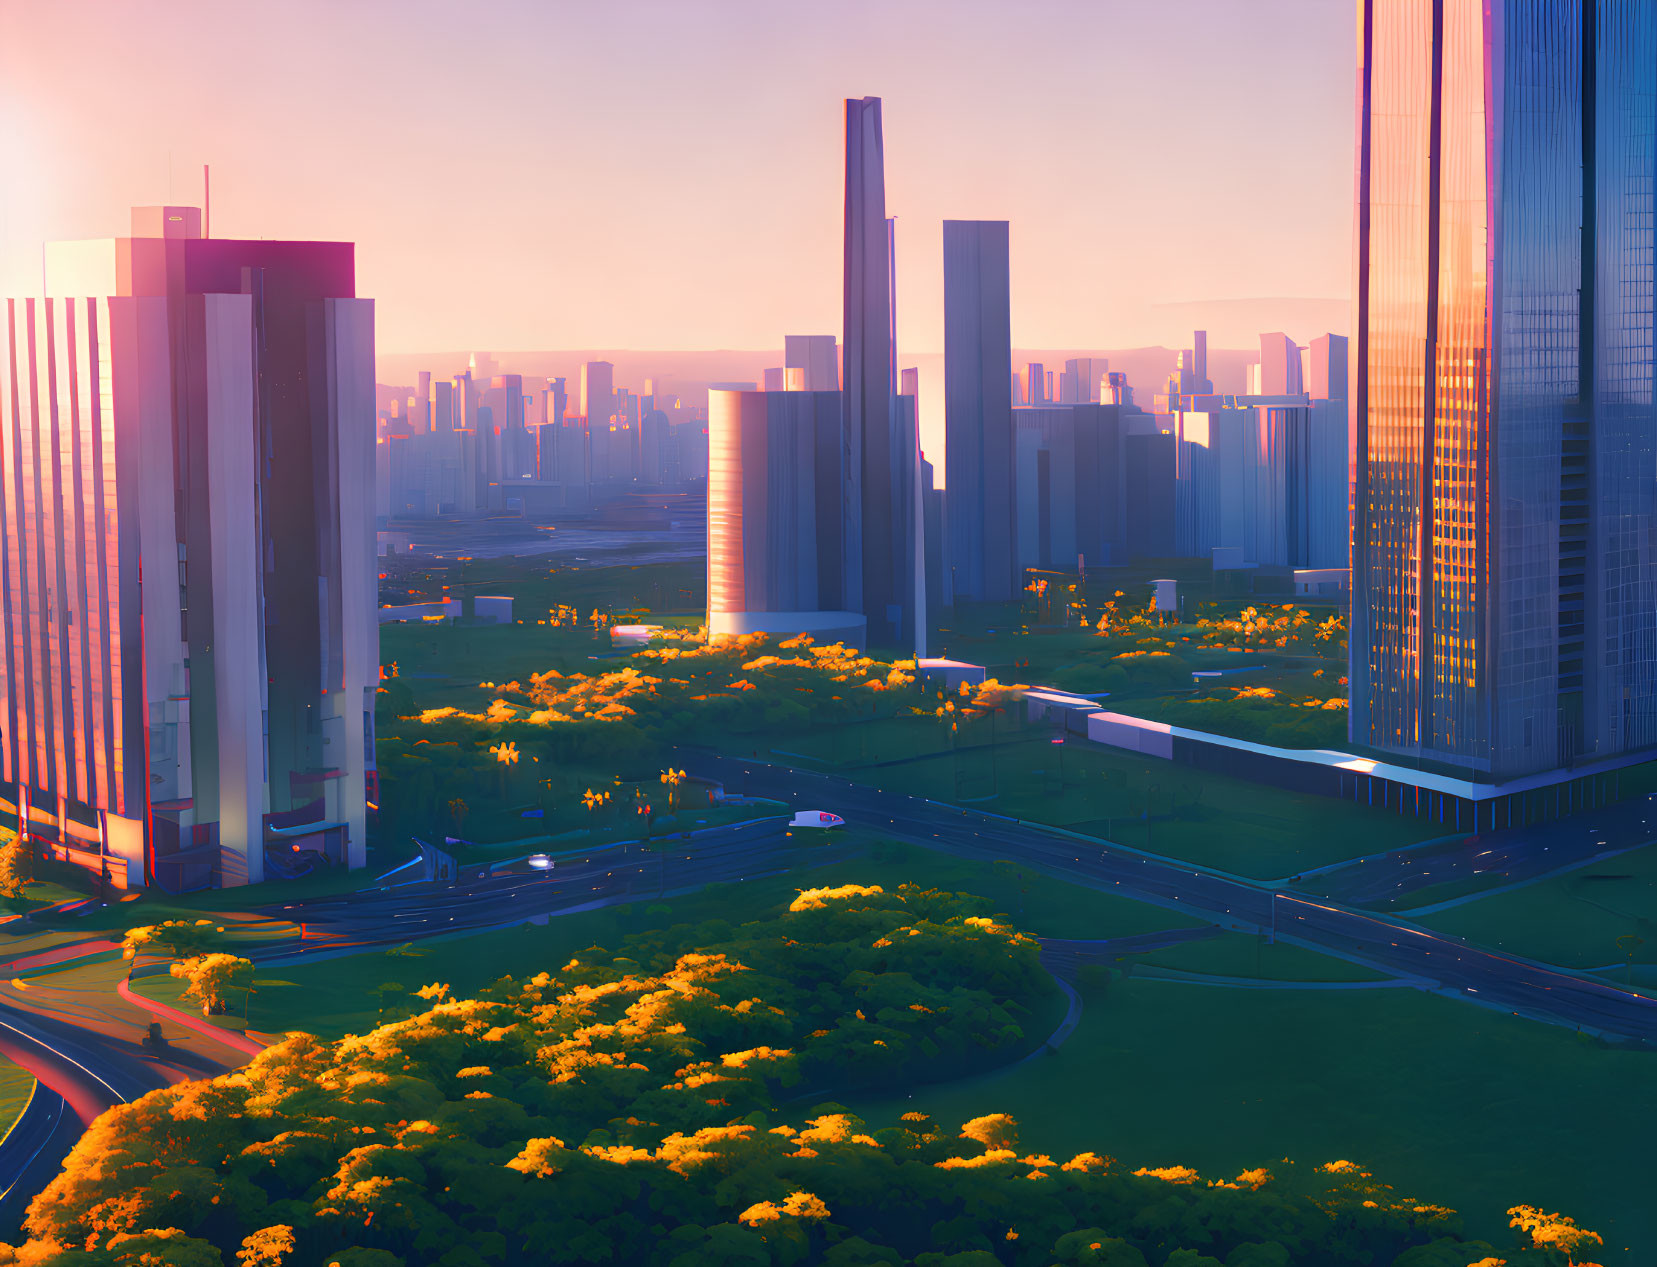 Futuristic cityscape at sunrise with parks and skyscrapers in golden light